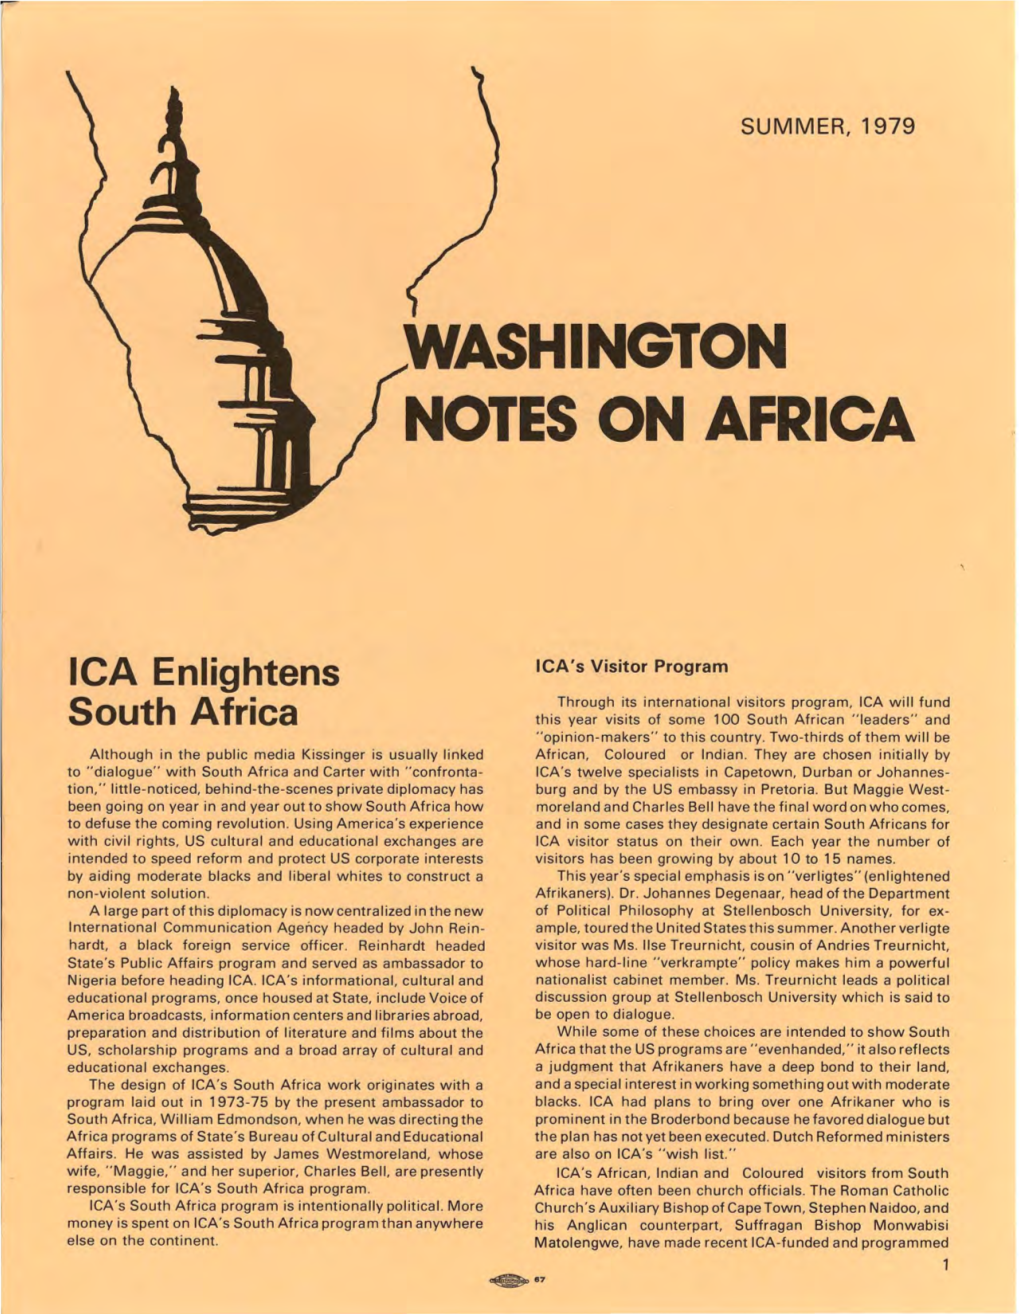 Notes on Africa